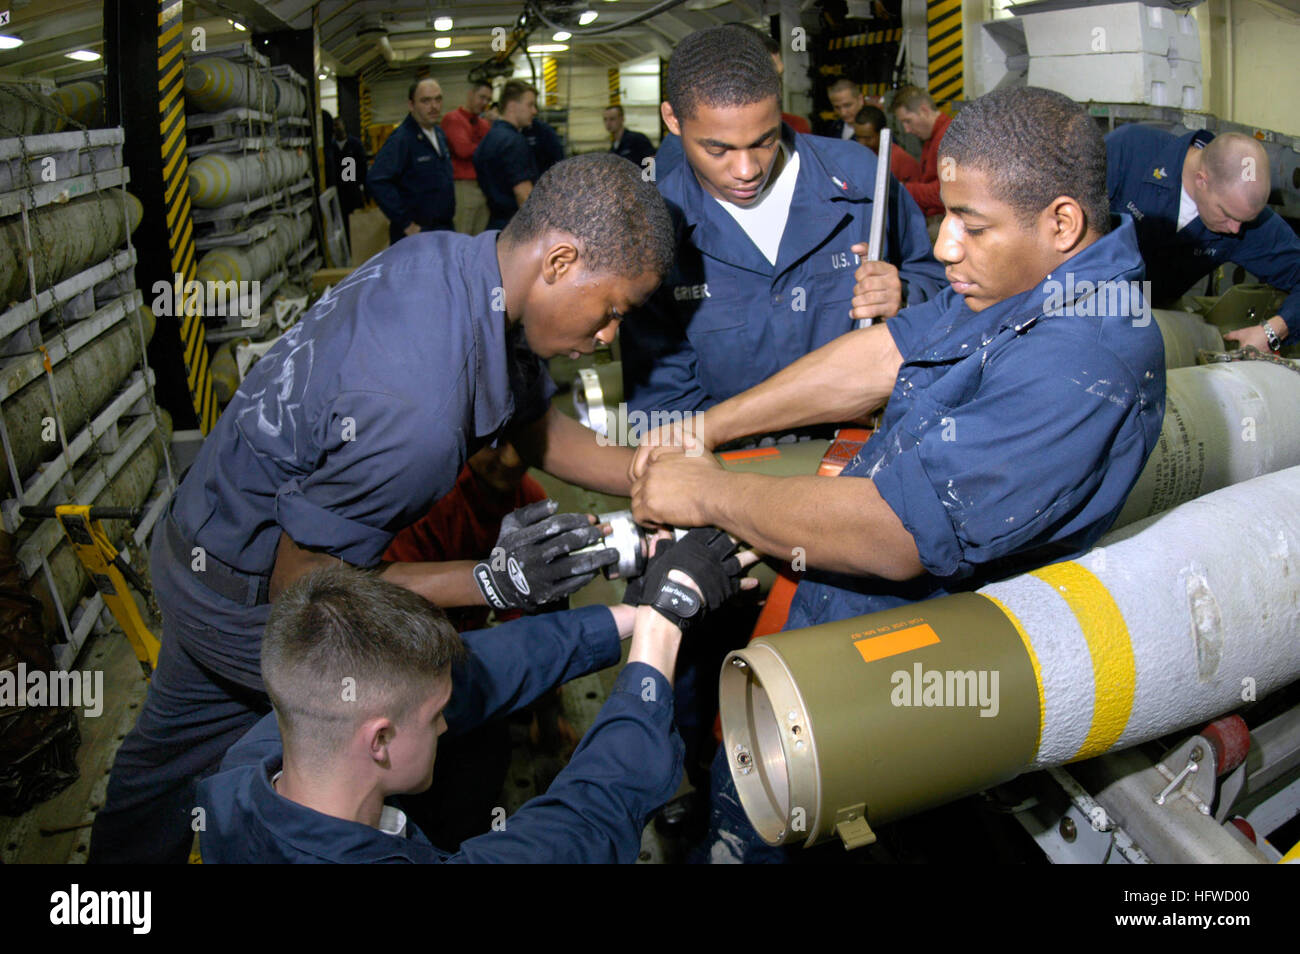 050623-N-5464G-004 Coral Sea (June 23, 2005) Ð Sailors assigned to the Weapons Department transport a weapon skid loaded with three MK-83 1,000-pound general-purpose bombs in the hangar bay aboard the conventionally powered aircraft carrier USS Kitty Hawk (CV 63). Kitty Hawk is currently operating in the Coral Sea in support of Exercise Talisman Sabre 2005. Talisman Sabre is an exercise jointly sponsored by the U.S. Pacific Command and Australian Defence Force Joint Operations Command, and designed to train the U.S. Seventh Fleet commander's staff and Australian Joint Operations staff as a des Stock Photo